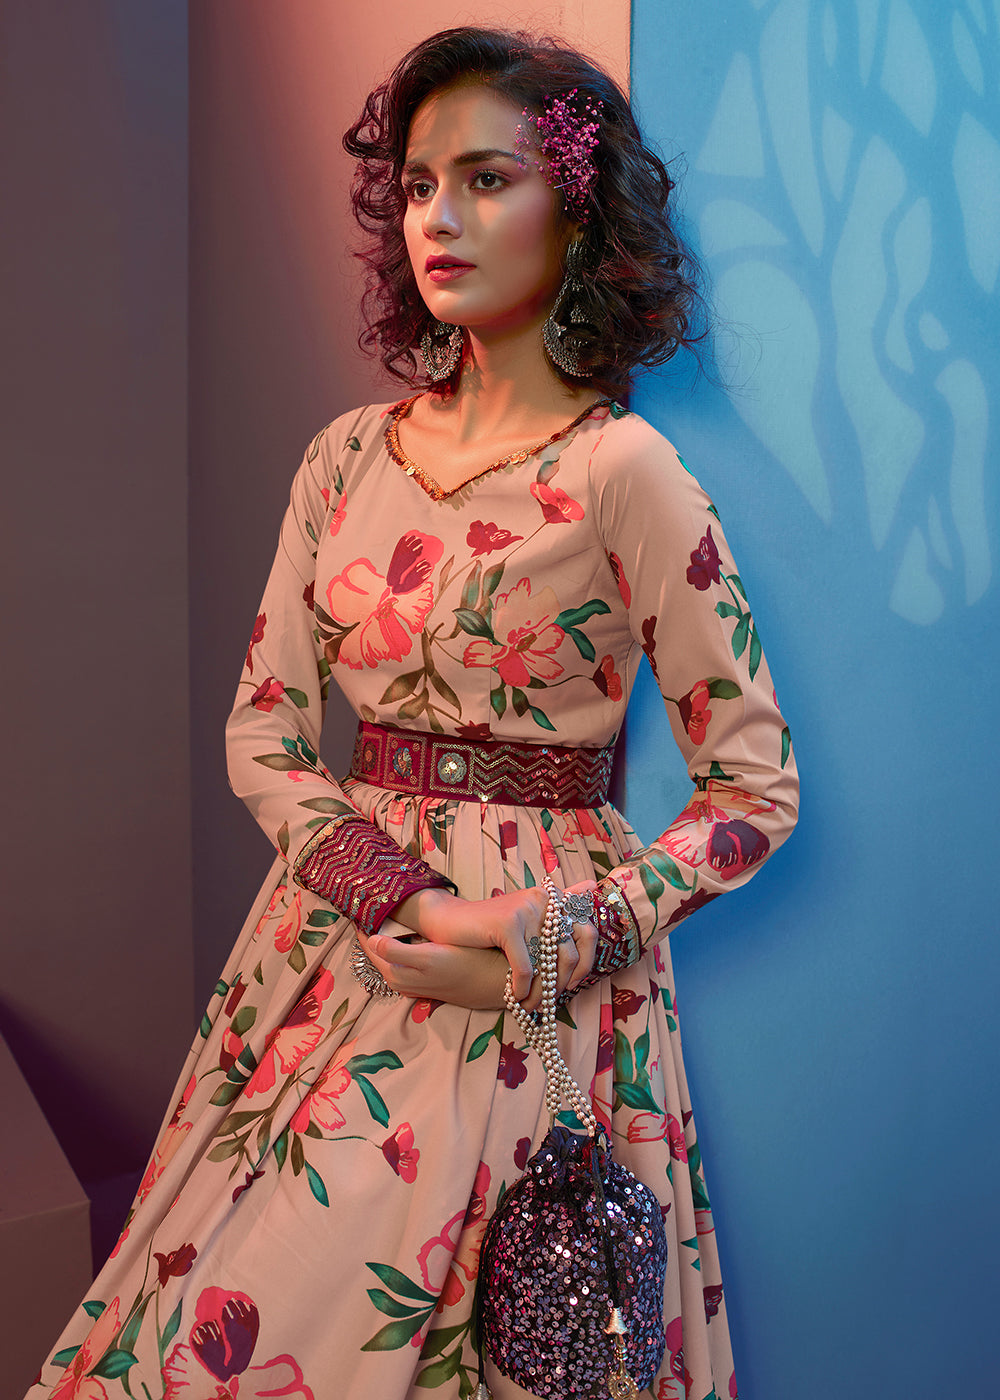 Buy Now Floral Printed Marvelous Peach Crepe Wedding Festive Party Gown Online in USA, UK, Australia, New Zealand, Canada & Worldwide at Empress Clothing. 